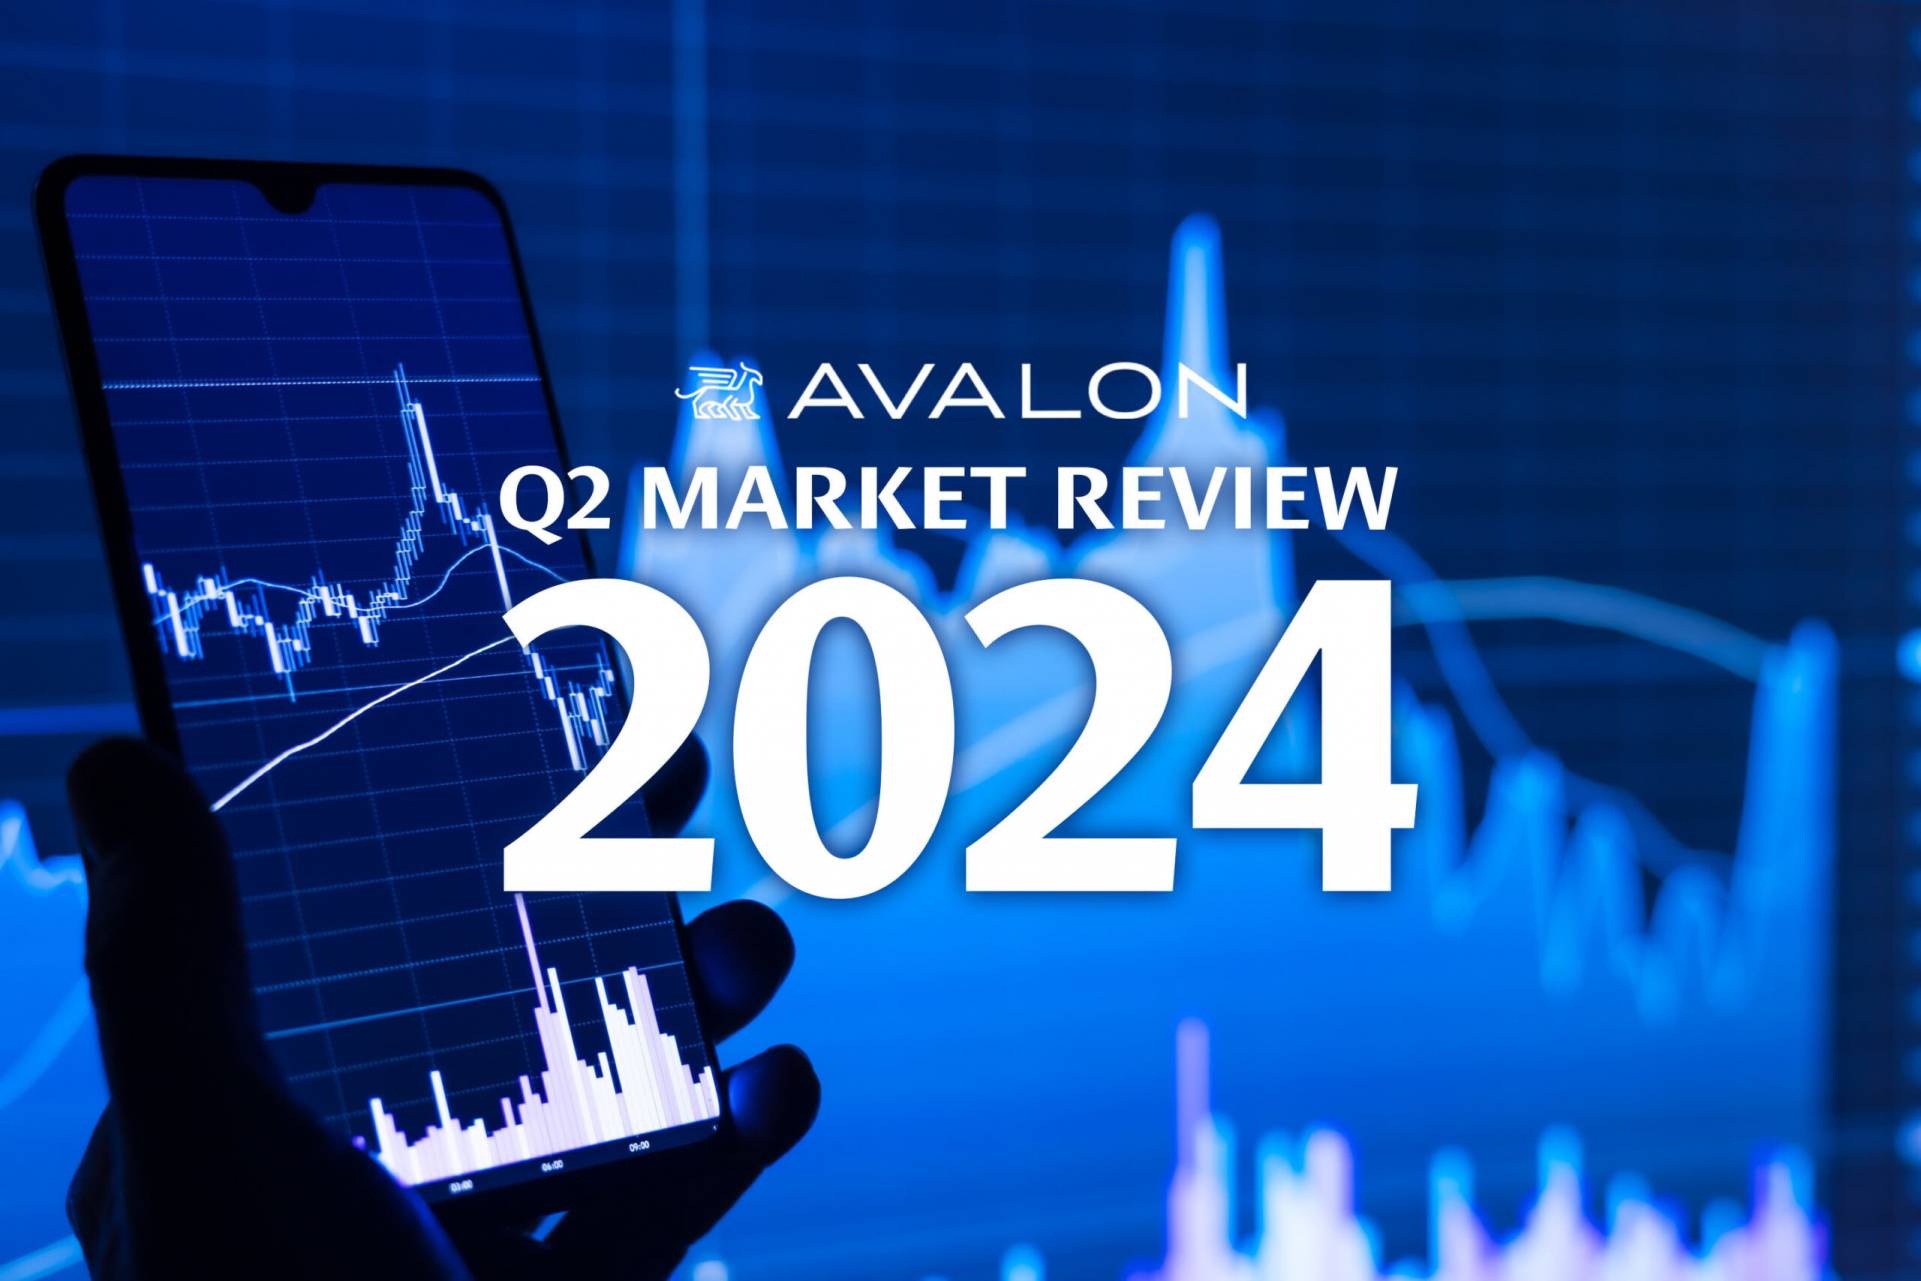 Q2 Market Review and Outlook 2024